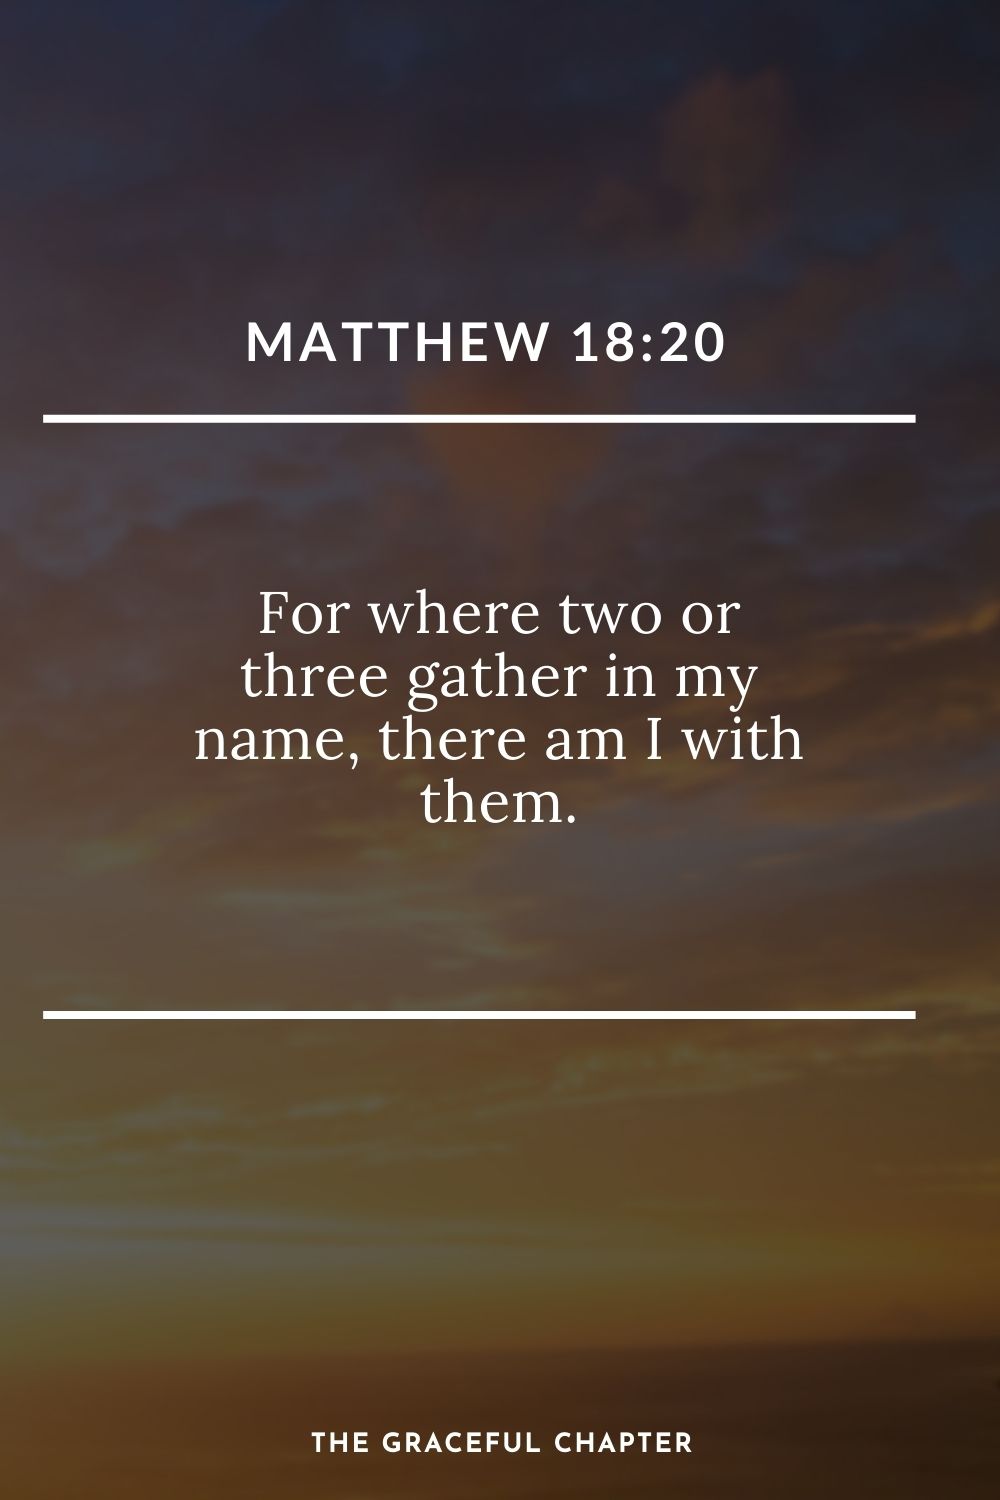 For where two or three gather in my name, there am I with them. Matthew 18:20